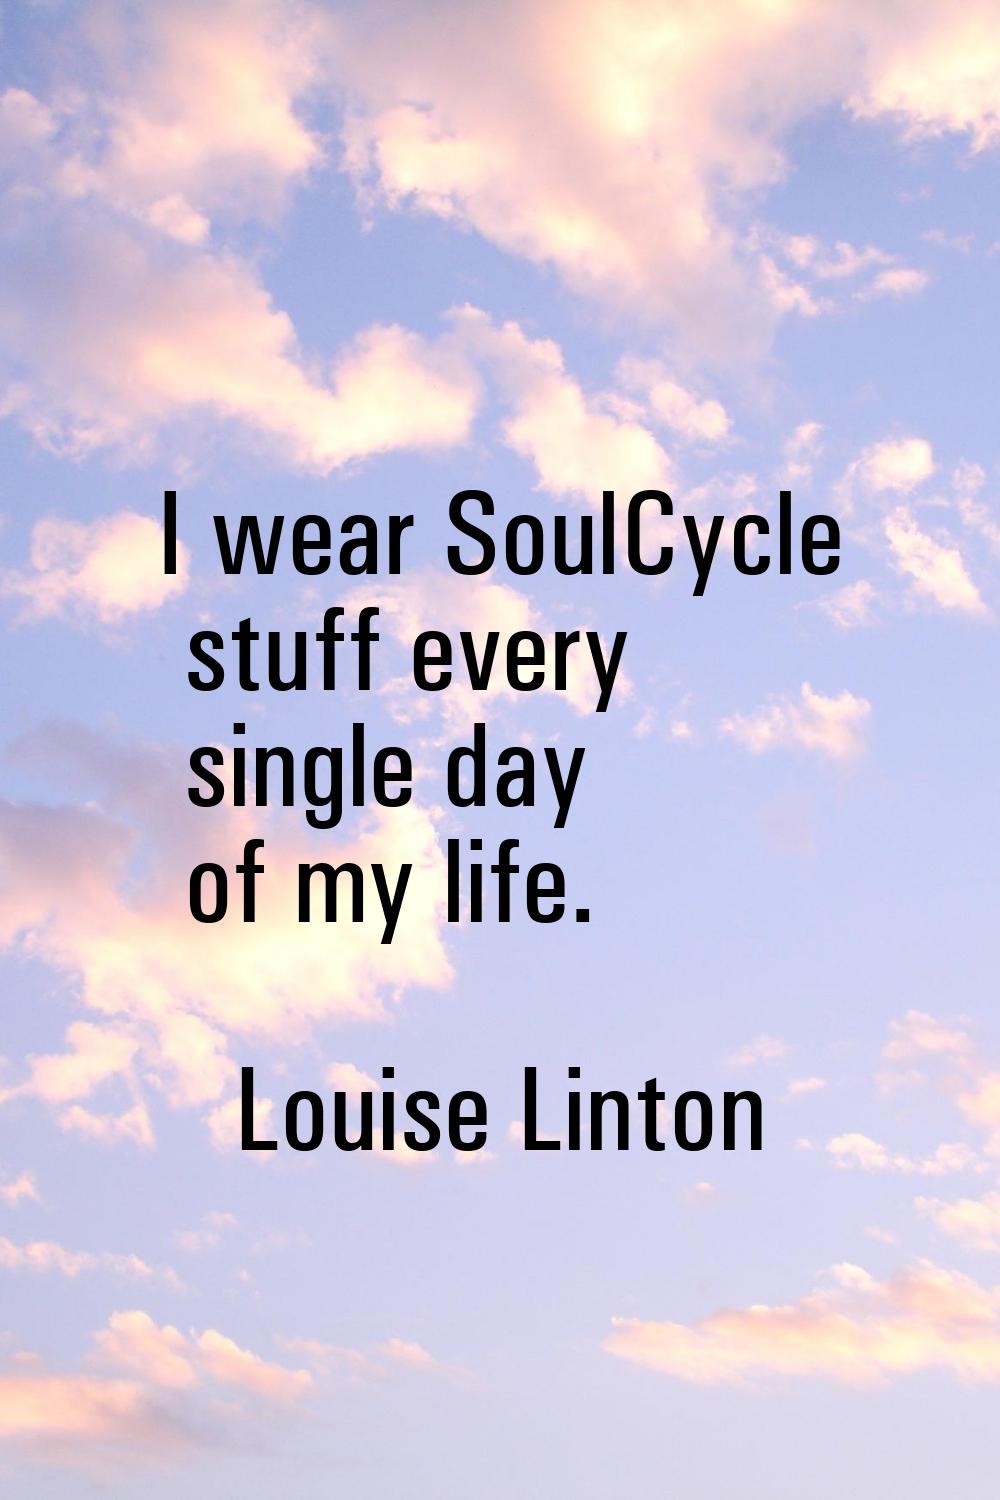 I wear SoulCycle stuff every single day of my life.